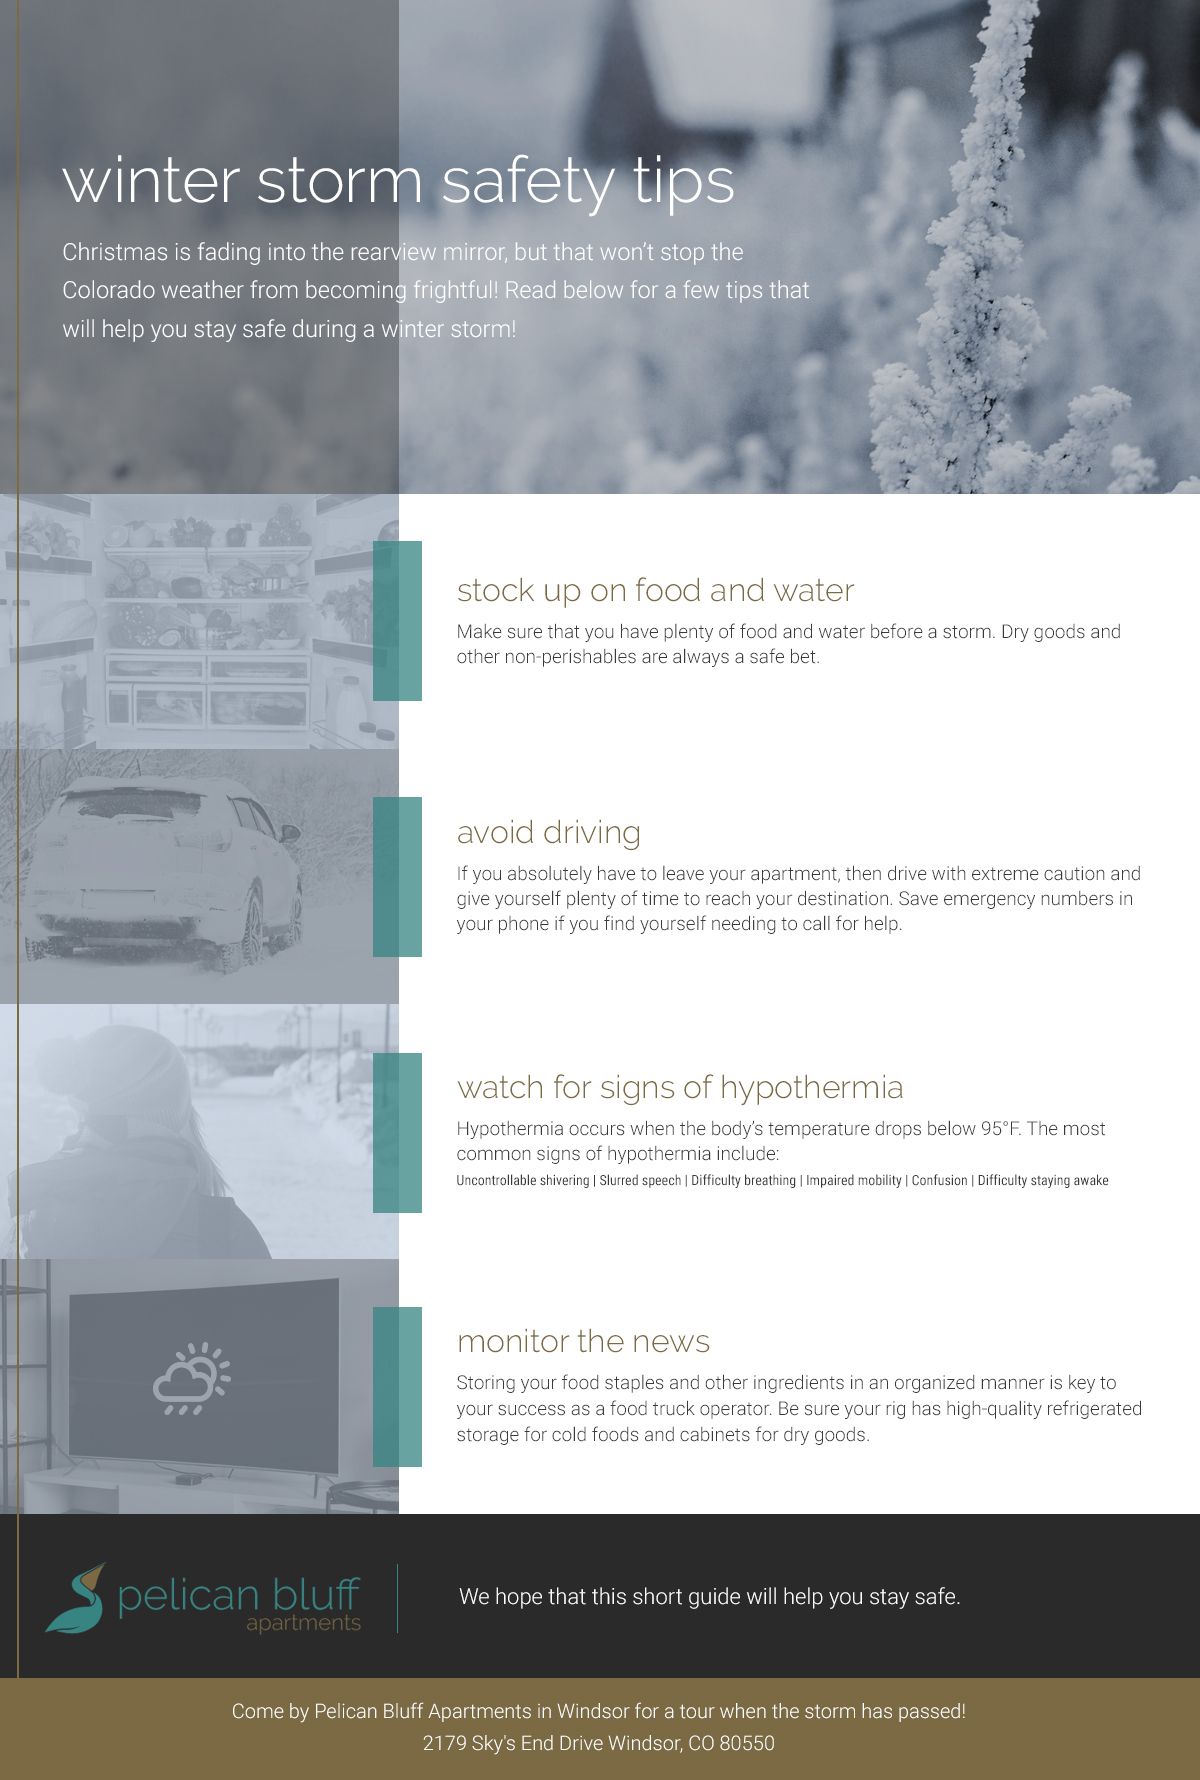 Winter Storm Safety Tips Infographic